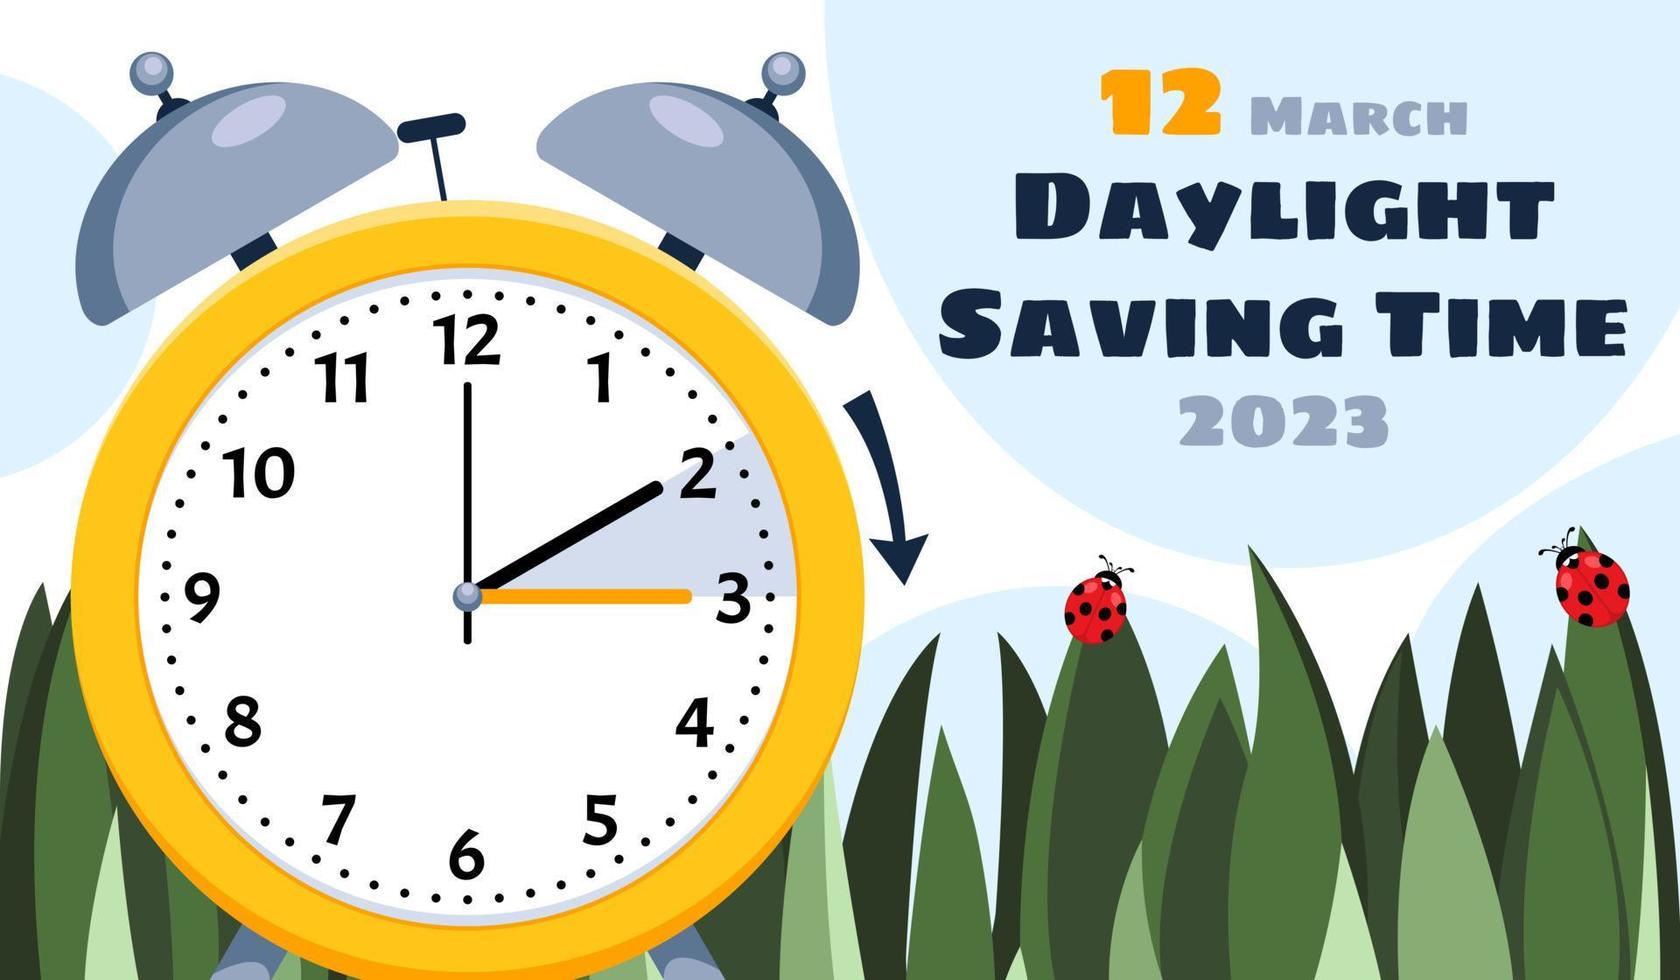 Daylight Saving Time Clock Set To An Hour Ahead March 12 2023